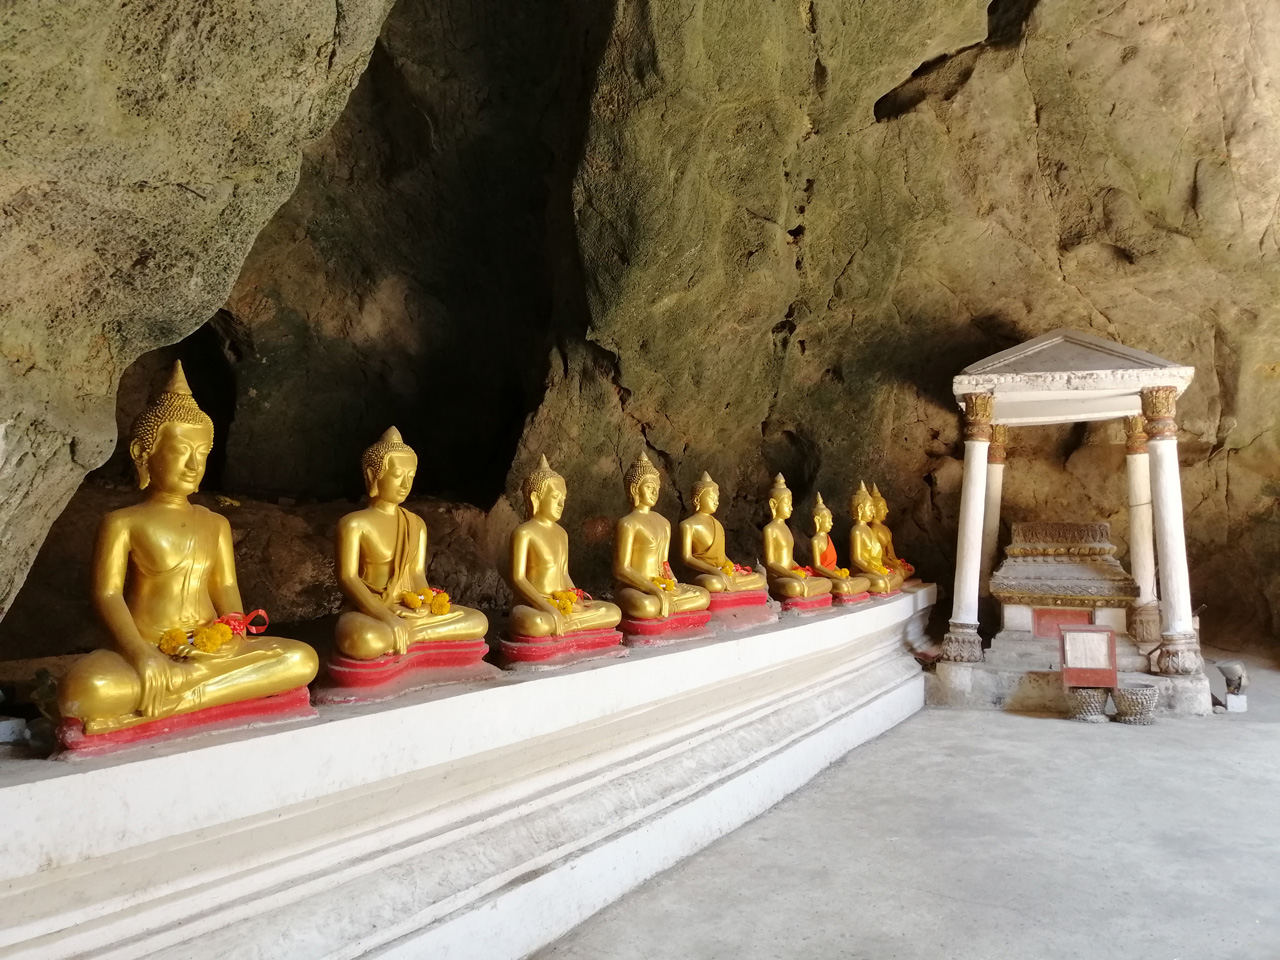 Khao Luang Cave Temple in Hua Hin